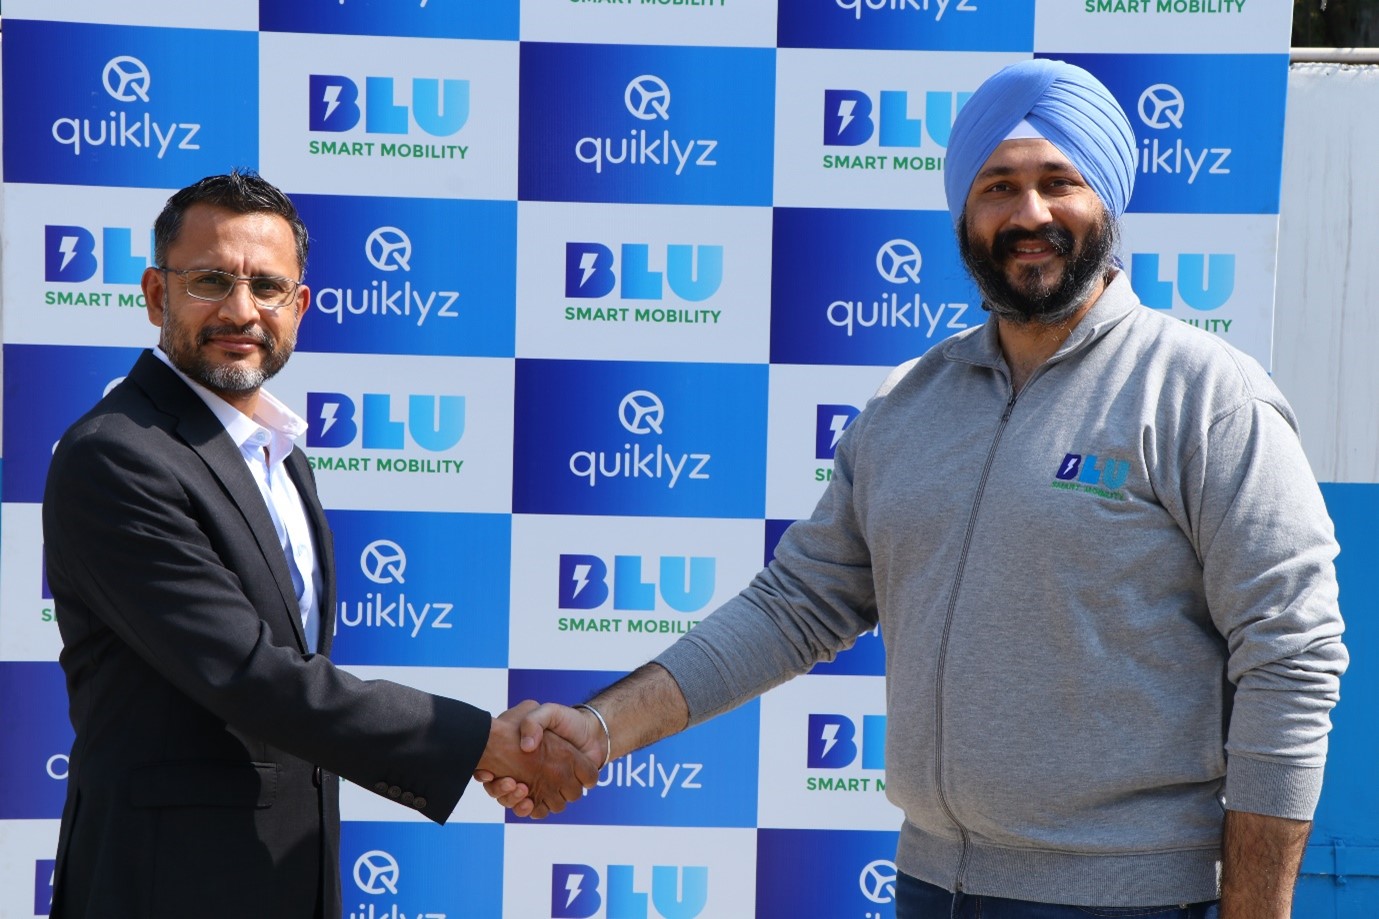 quiklyz-ties-up-with-blusmart-to-provide-500-evs-on-leasing